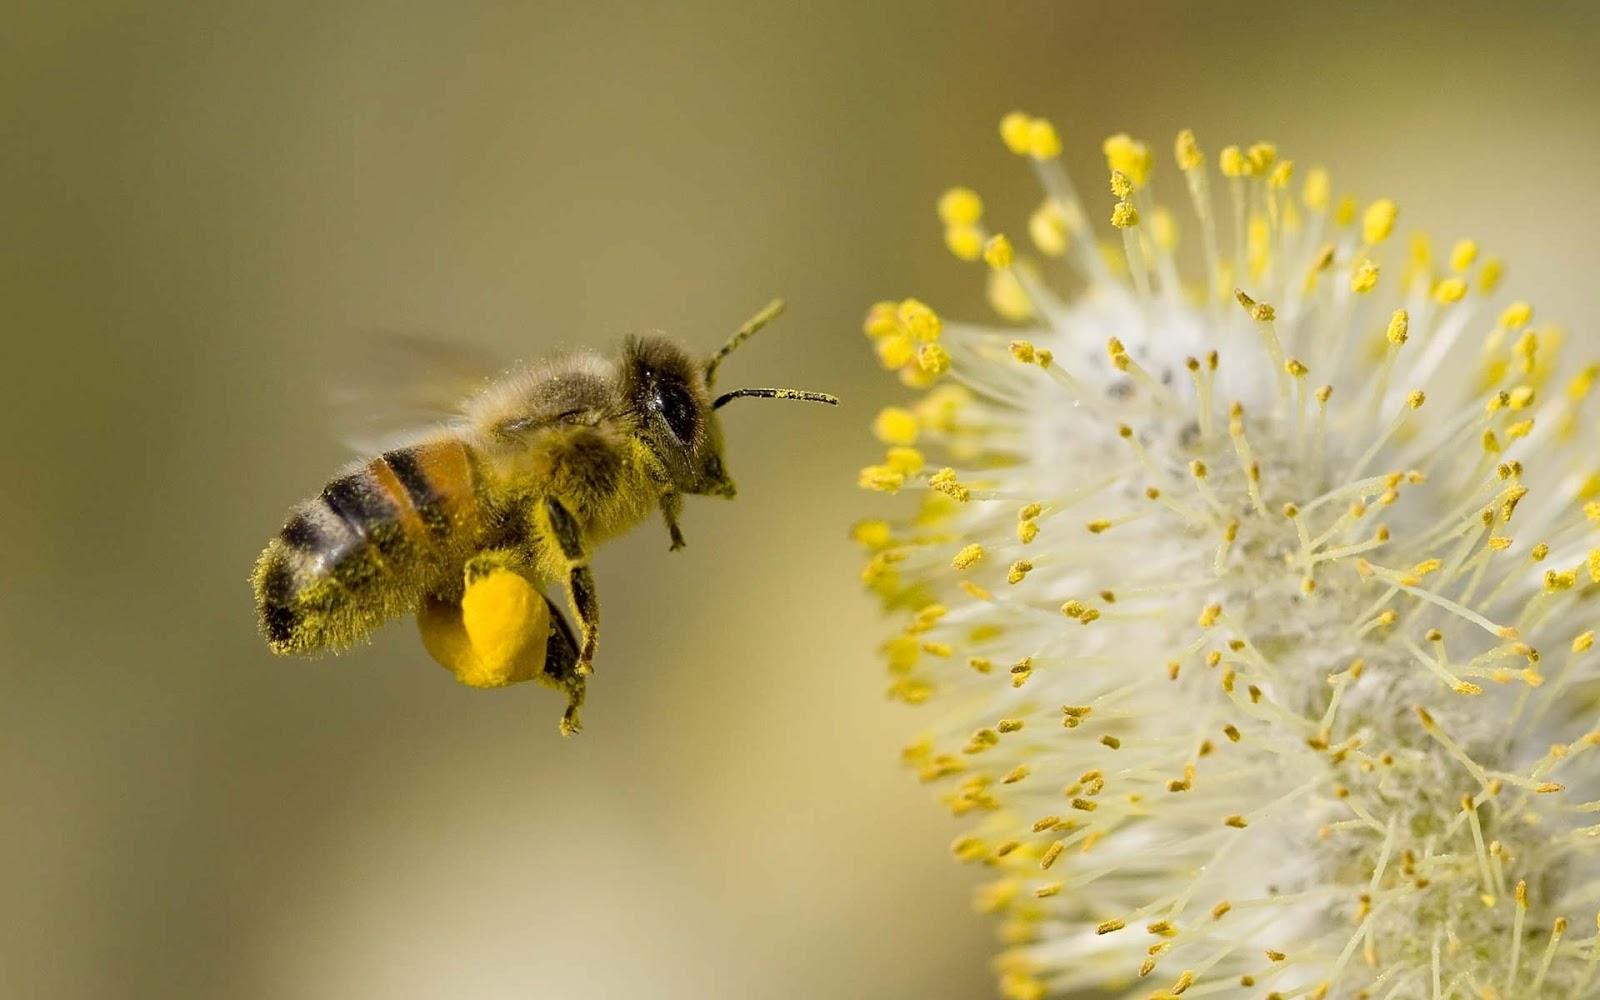 Best Collection Of Honey Bees Wallpaper For Android. Top Level